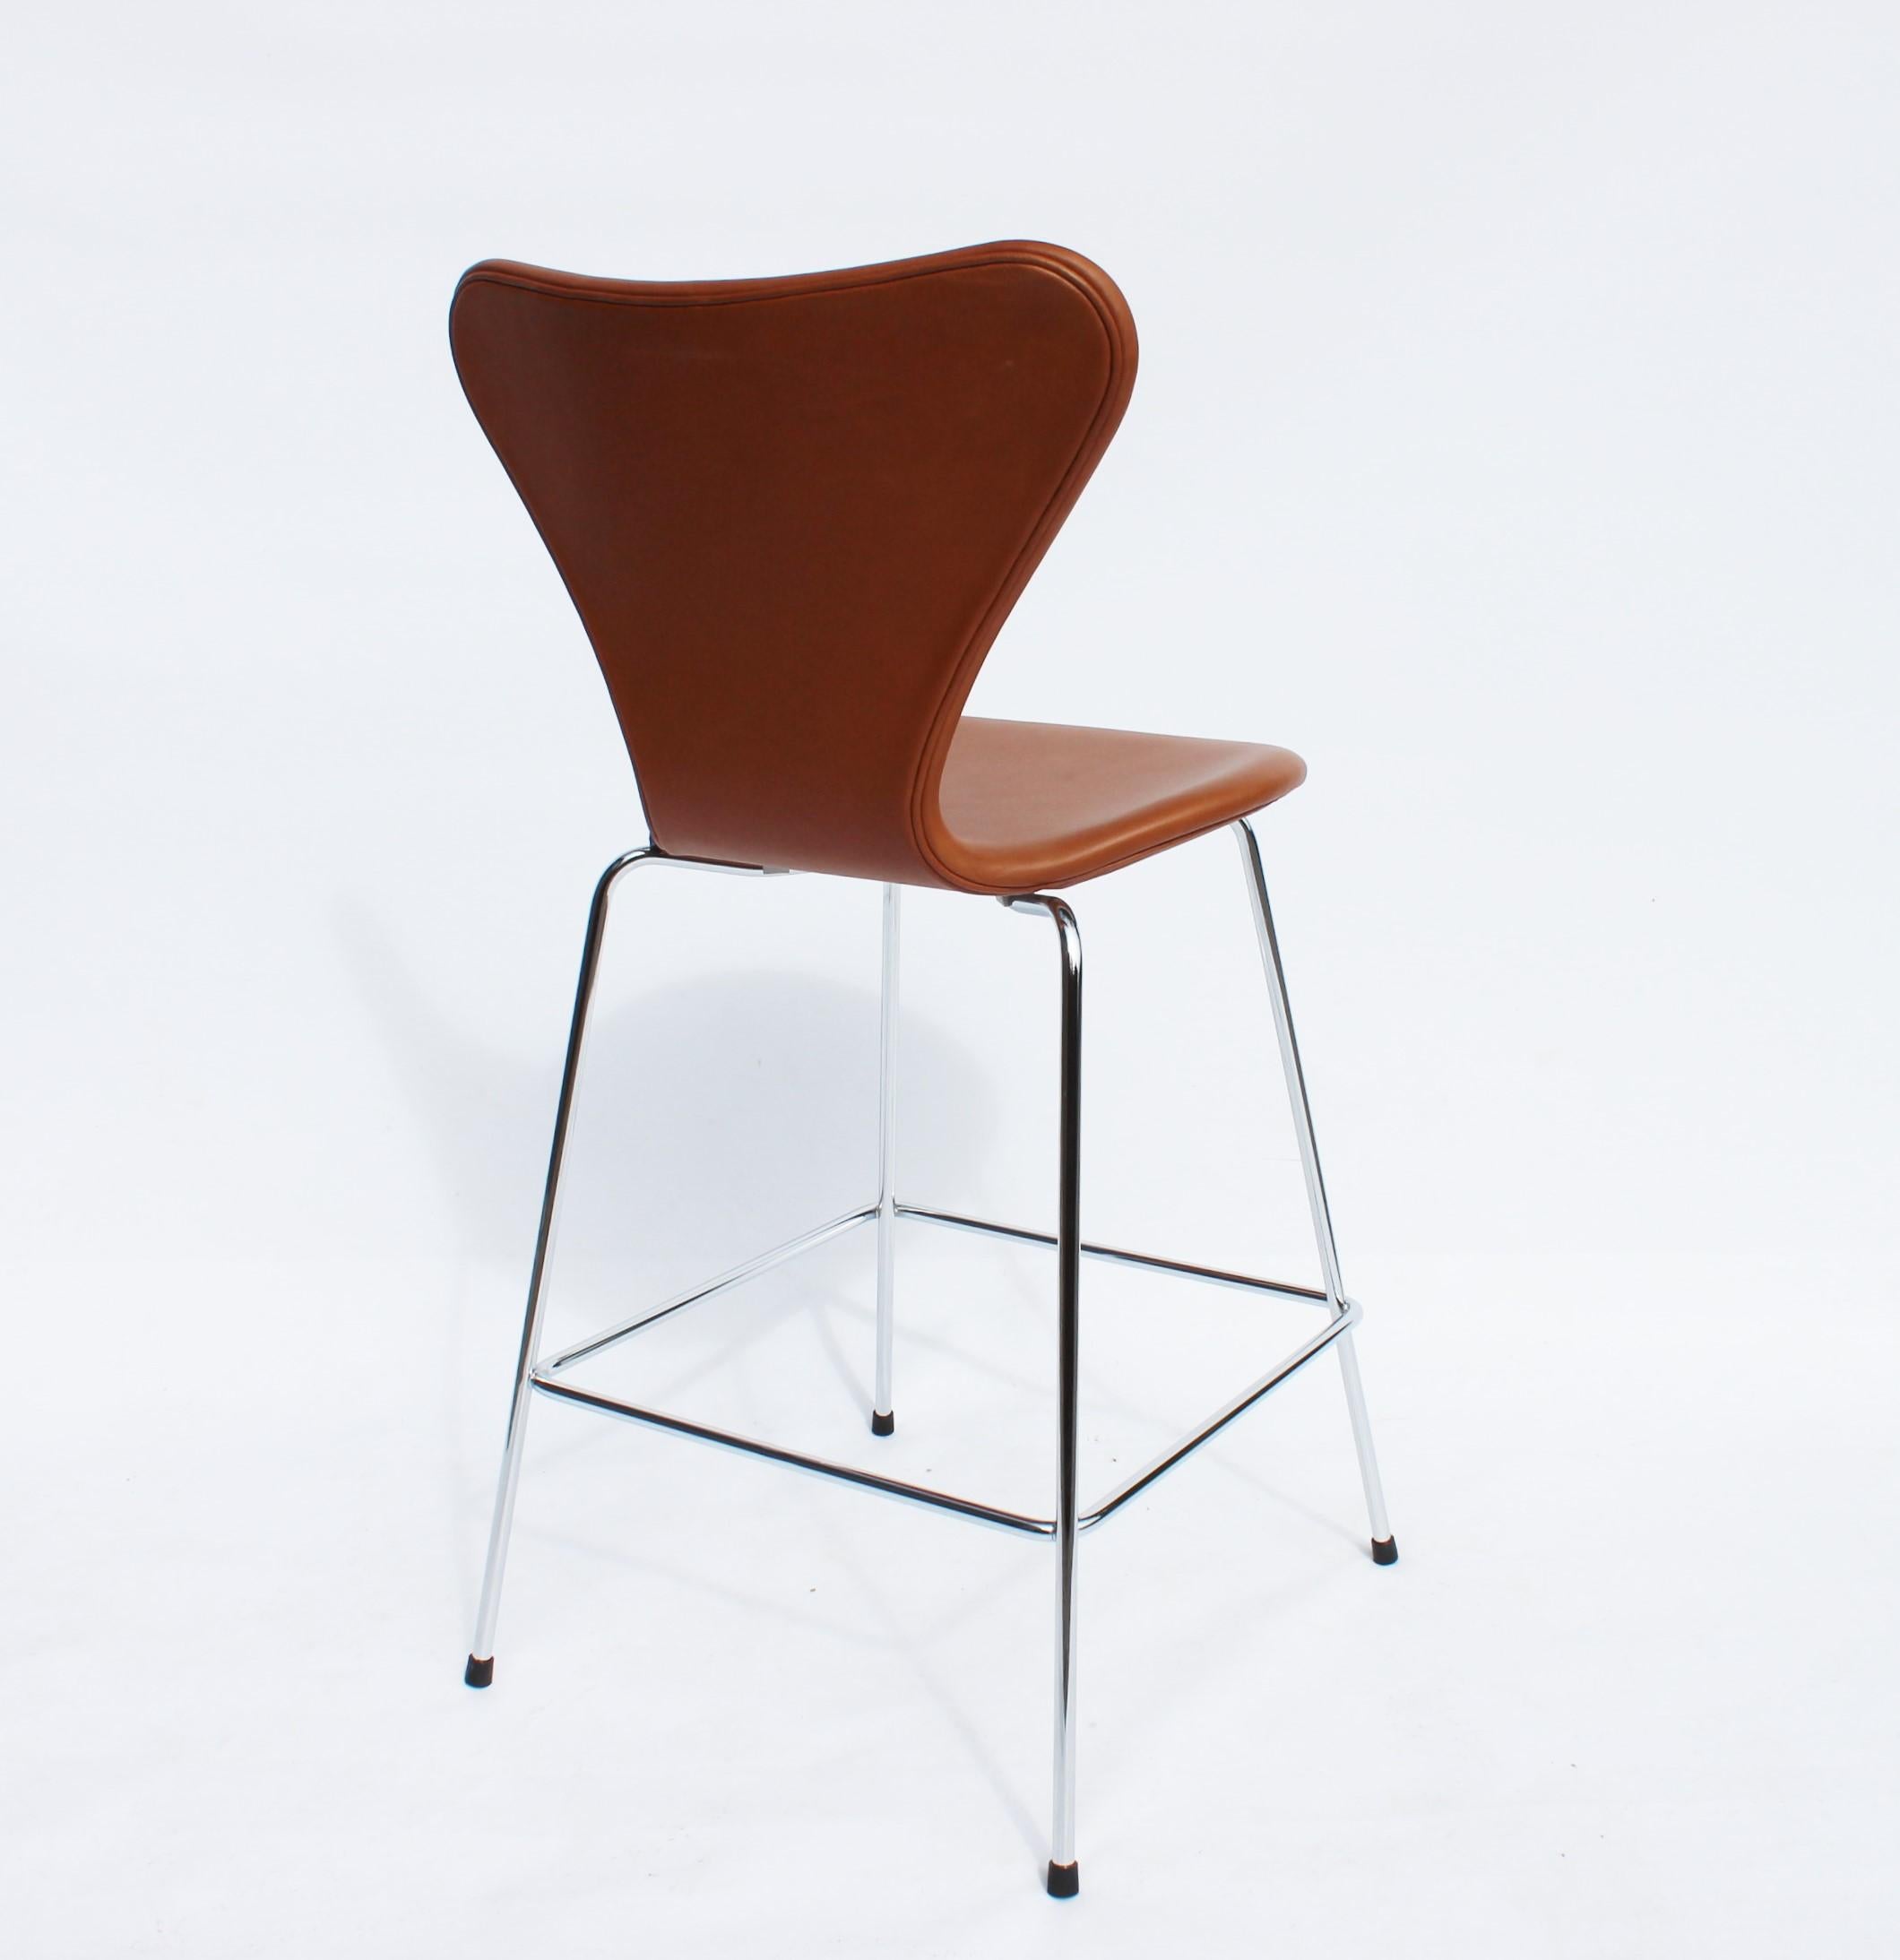 Mid-20th Century Pair of Seven Bar Stools, Model 3187, with Cognac Leather by Arne Jacobsen